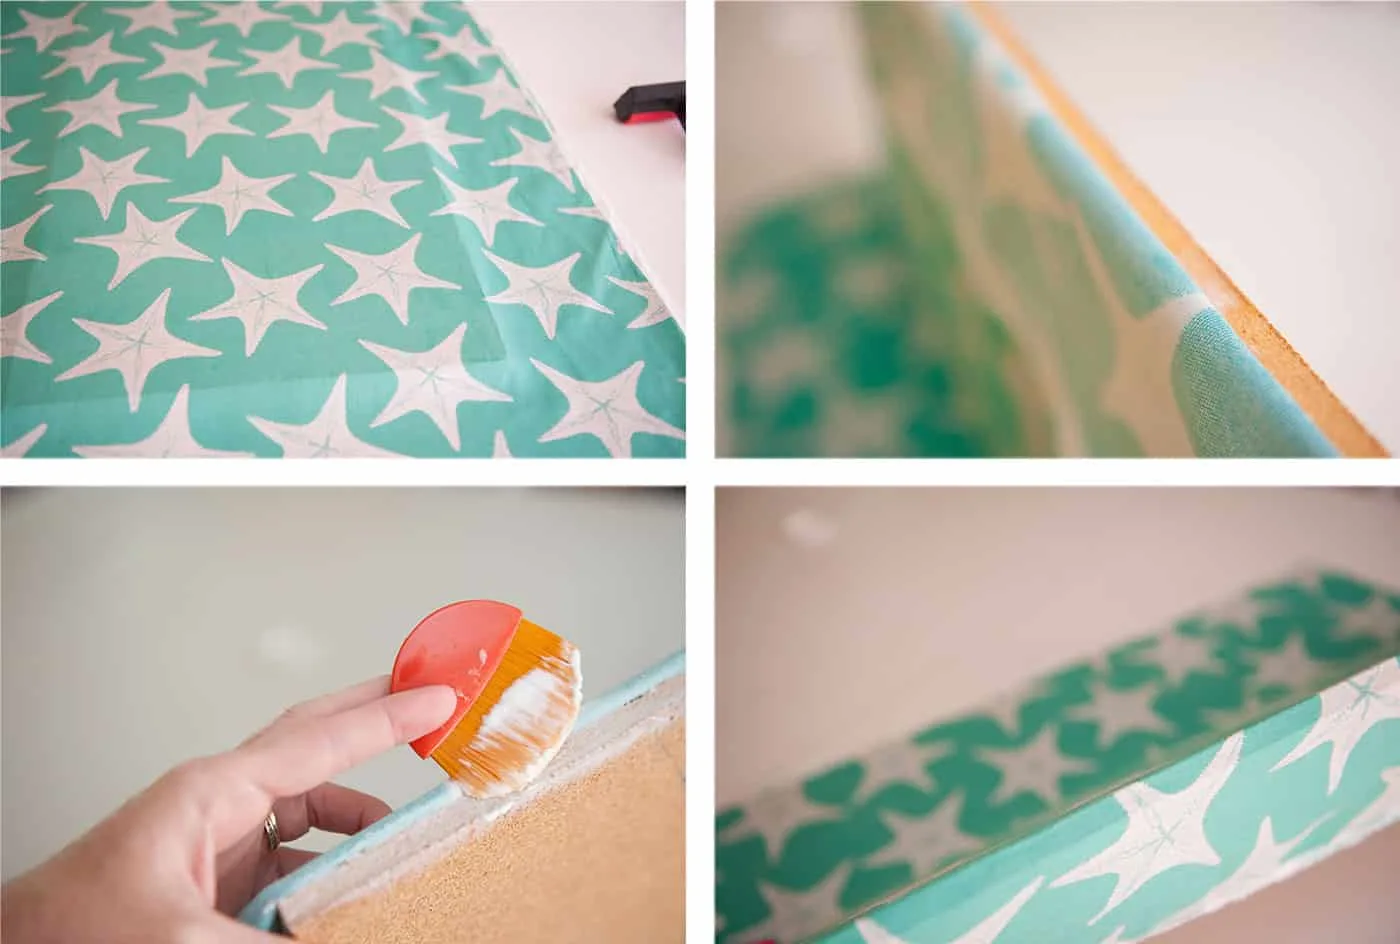 Add Mod Podge to the corkboard and wrap the fabric around the edges